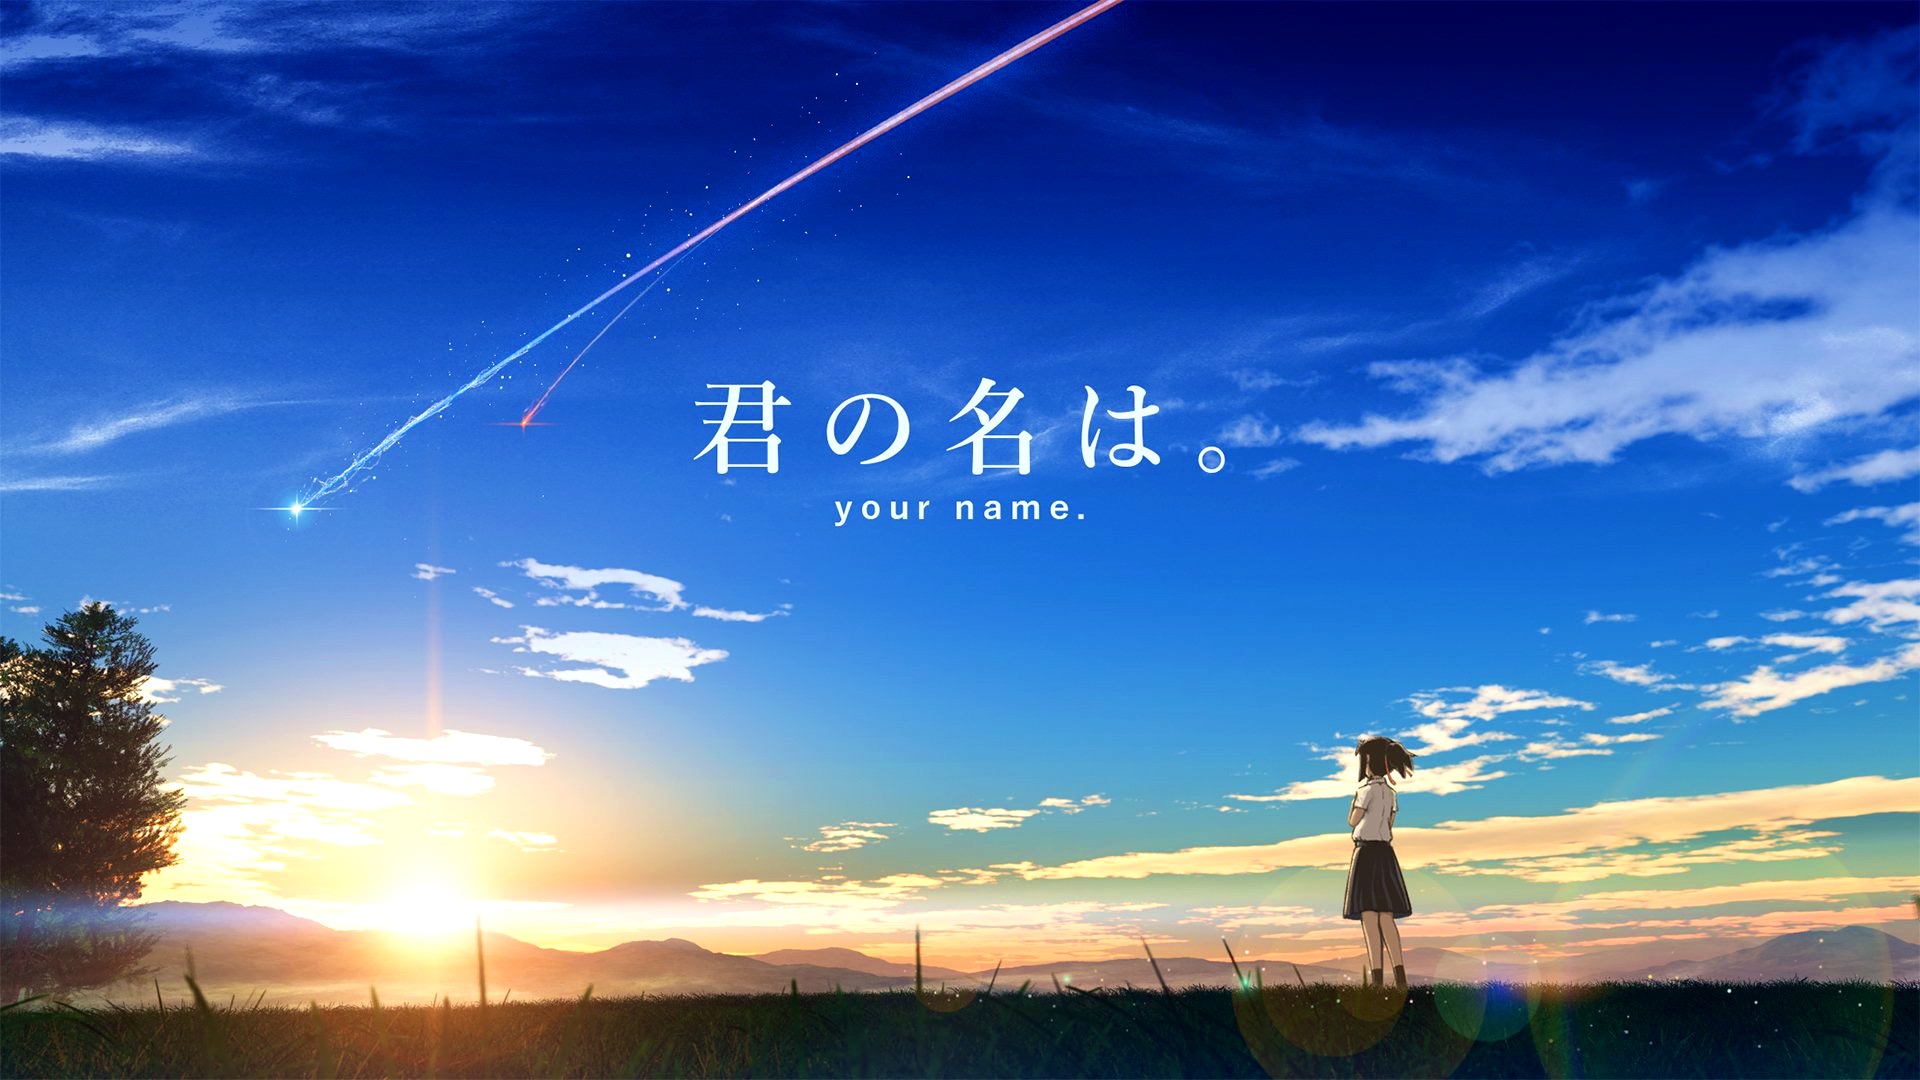 Name Wallpapers For Free - Kimi No Nawa Ost - 1920x1080 Wallpaper -  